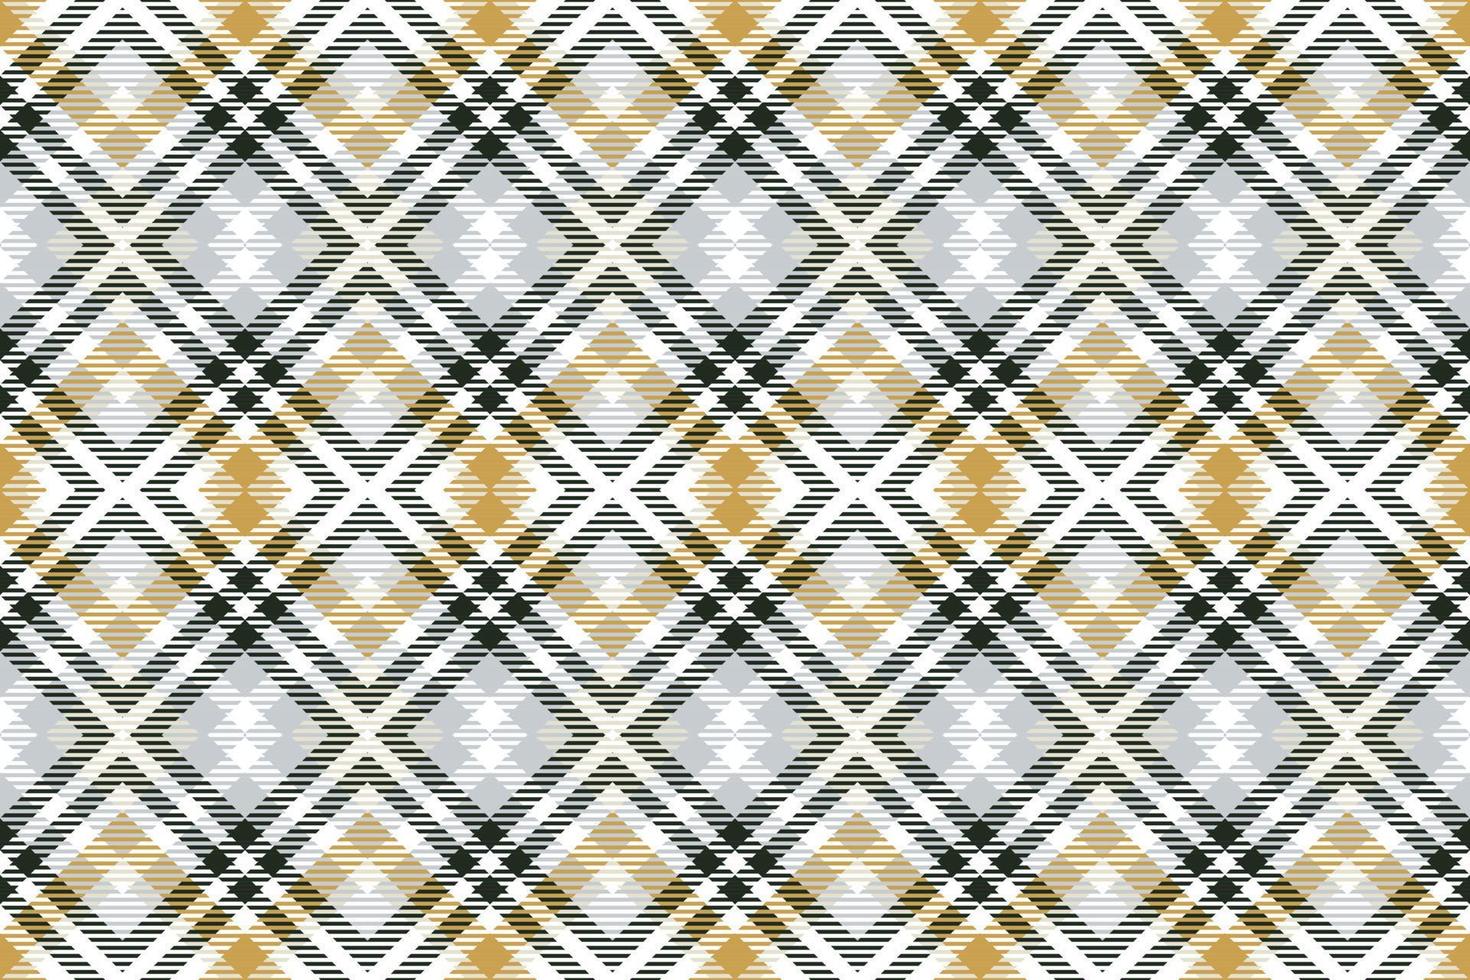 Scott tartan pattern seamless is a patterned cloth consisting of criss crossed, horizontal and vertical bands in multiple colours.plaid Seamless For scarf,pyjamas,blanket,duvet,kilt large shawl. vector